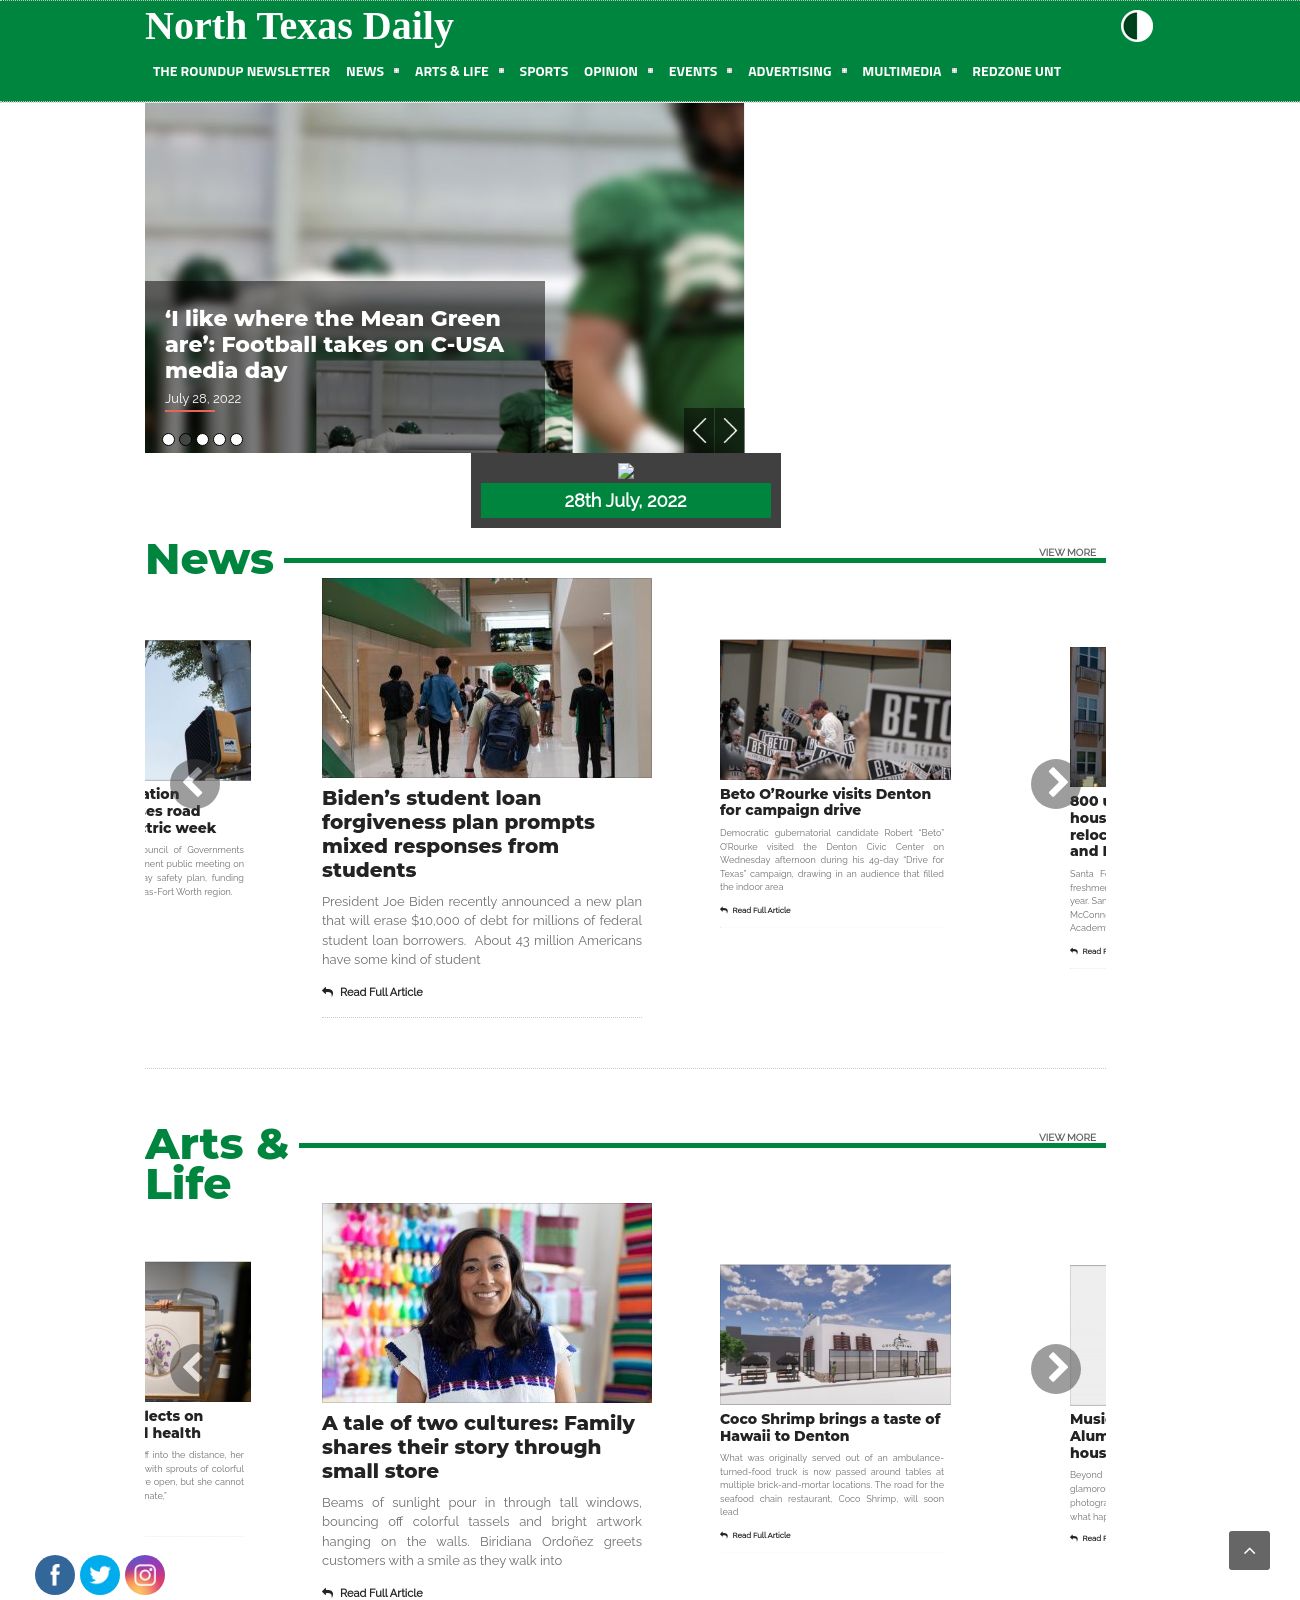 North Texas Daily at 2022-09-14 11:27:16-05:00 local time